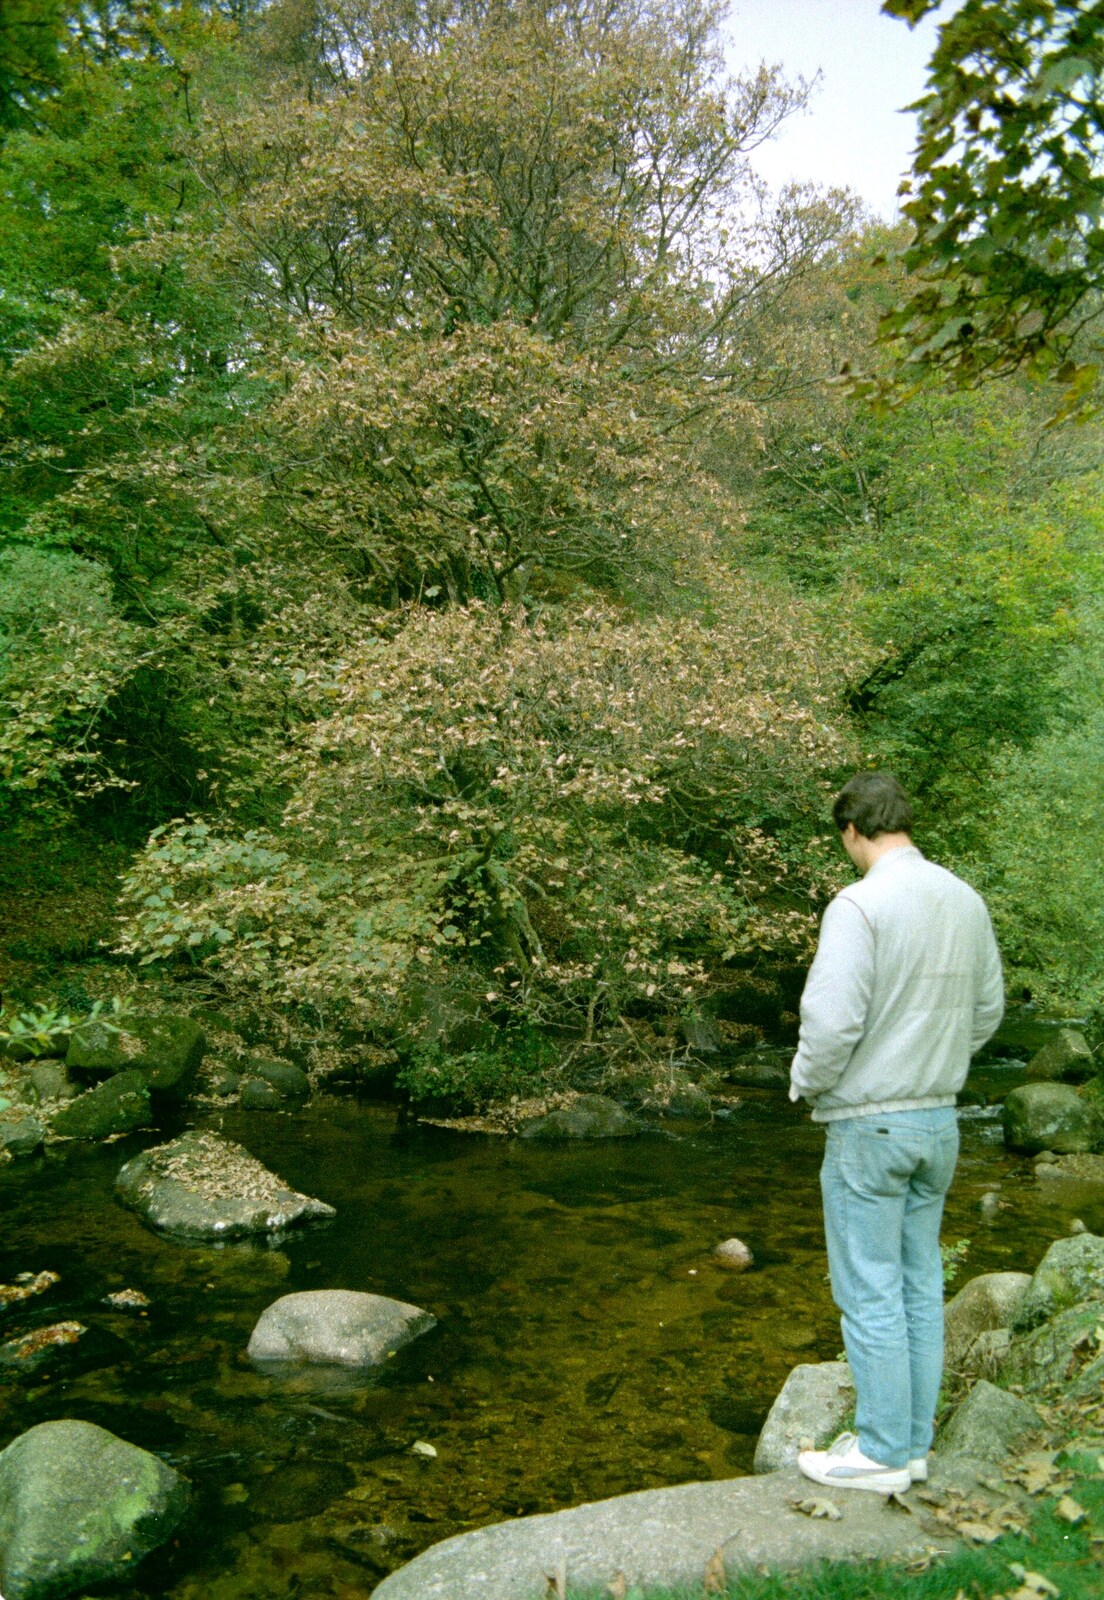 Riki looks into a river from A Trip to Trotsky's Mount, Dartmoor, Devon - 20th March 1987